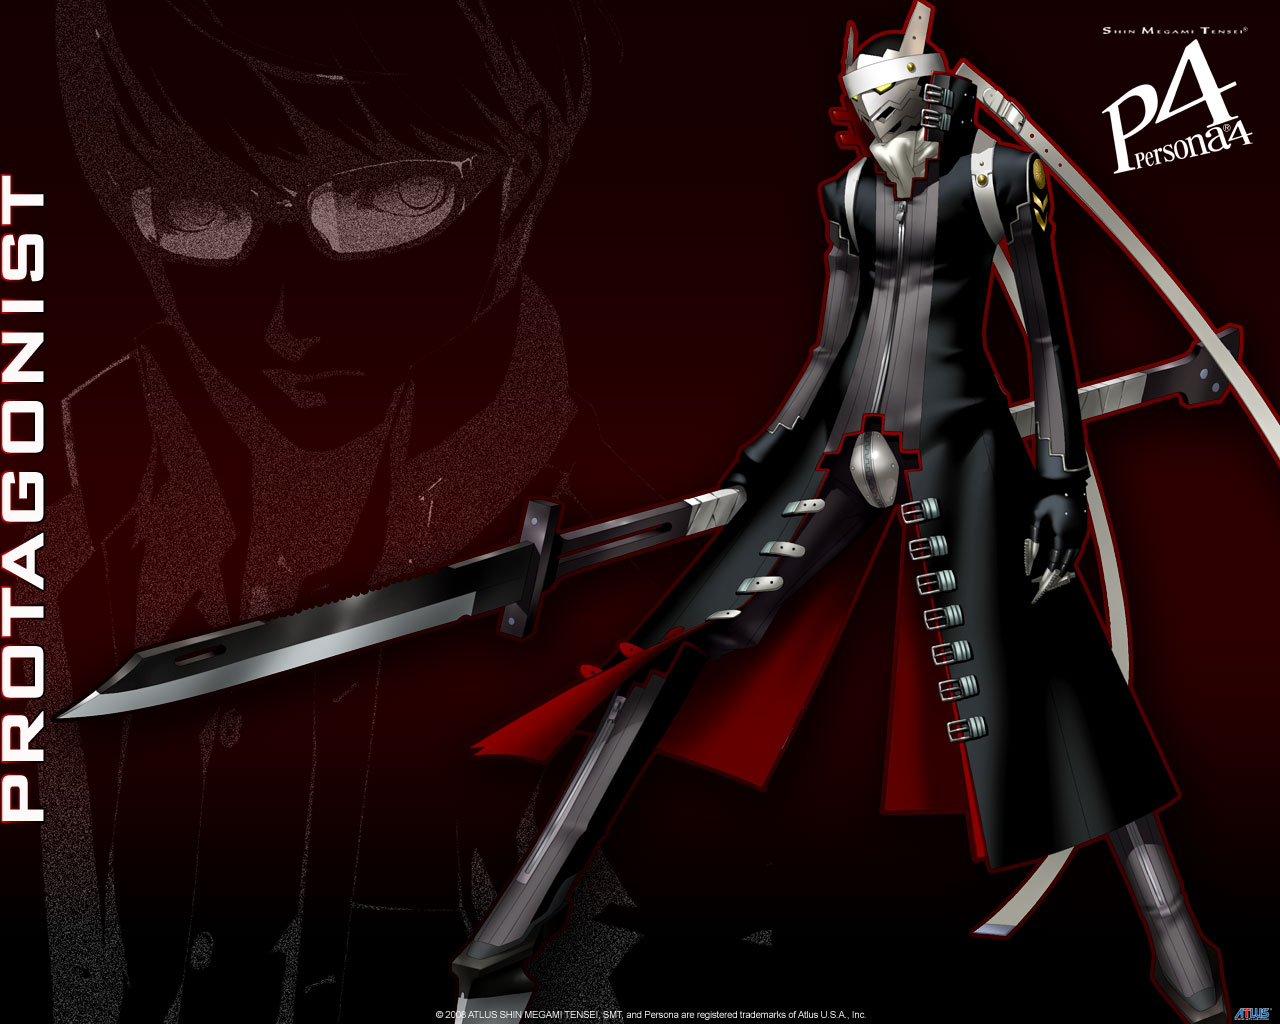 The Ultimate Persona 4 Wallpapers 1280x1024